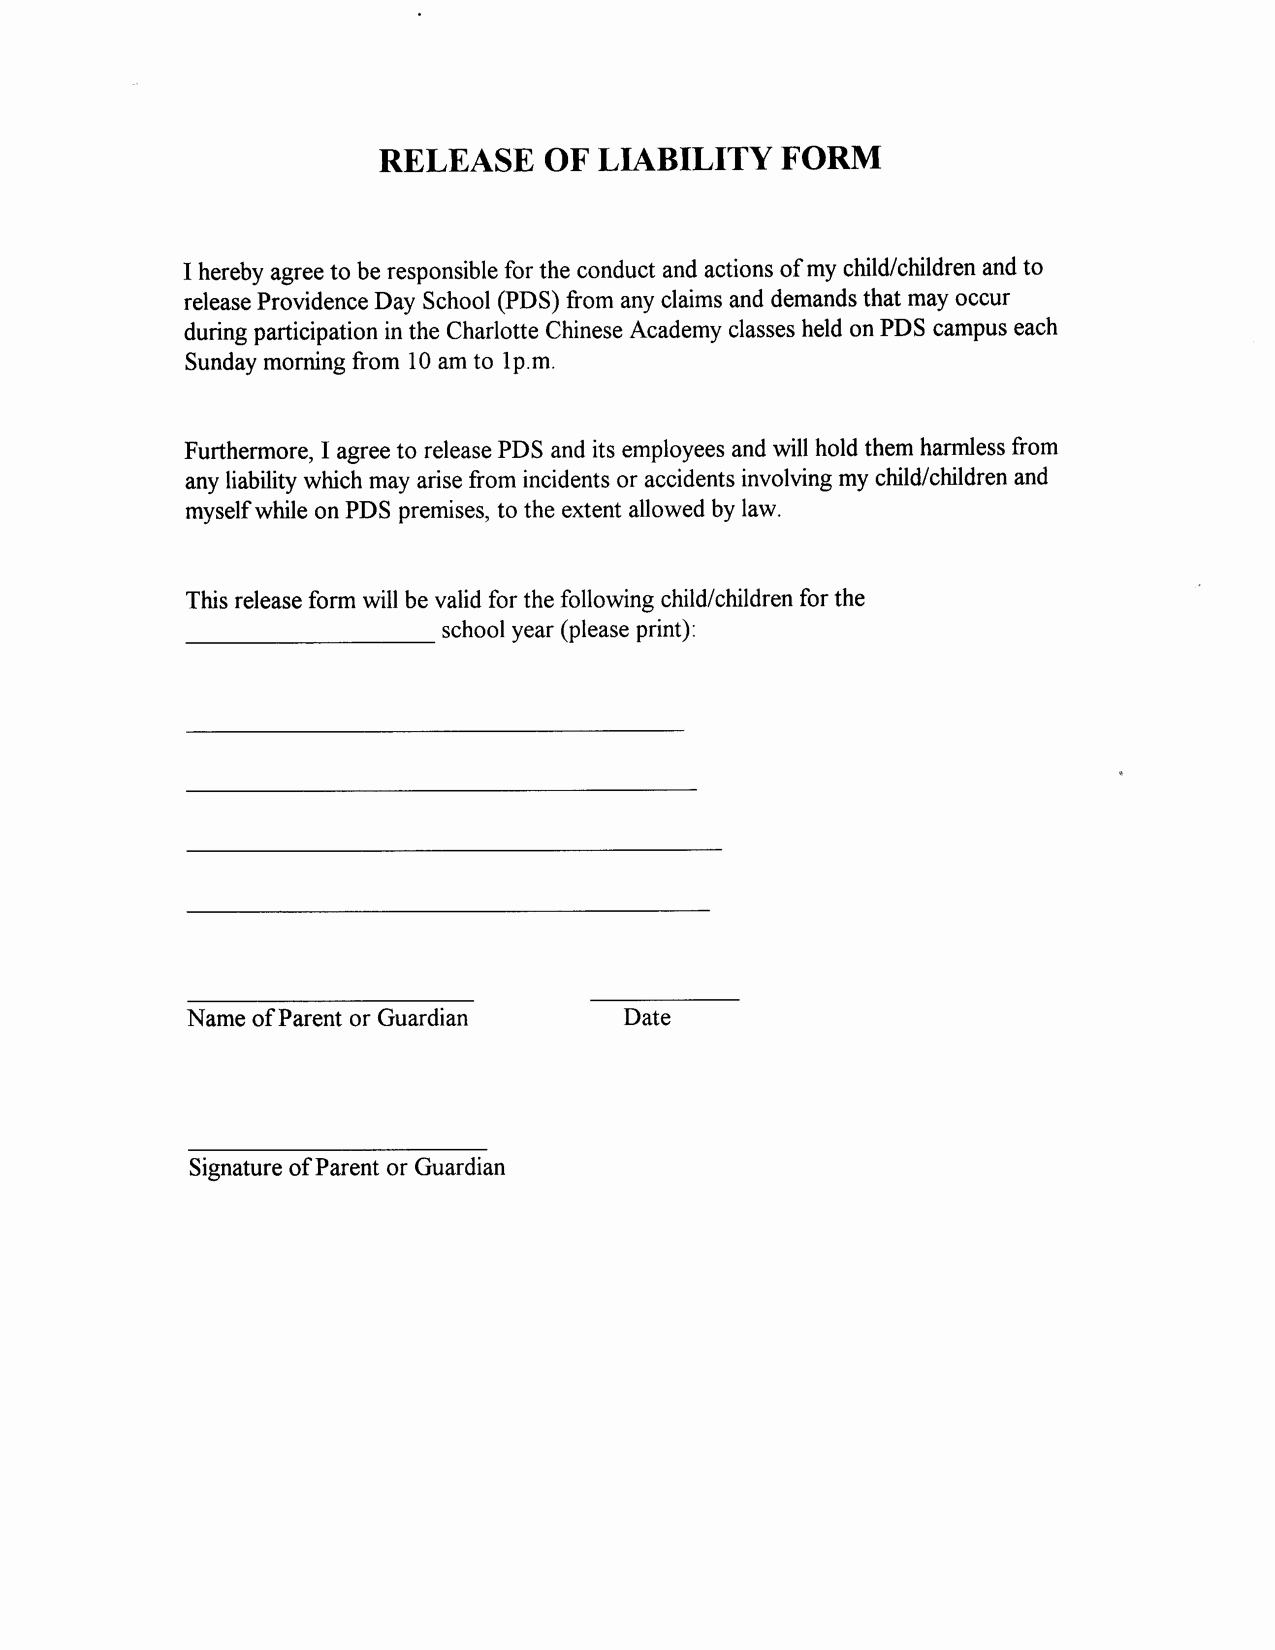 Release Of Liability form Template Lovely Liability Release form Template In Images Release Of